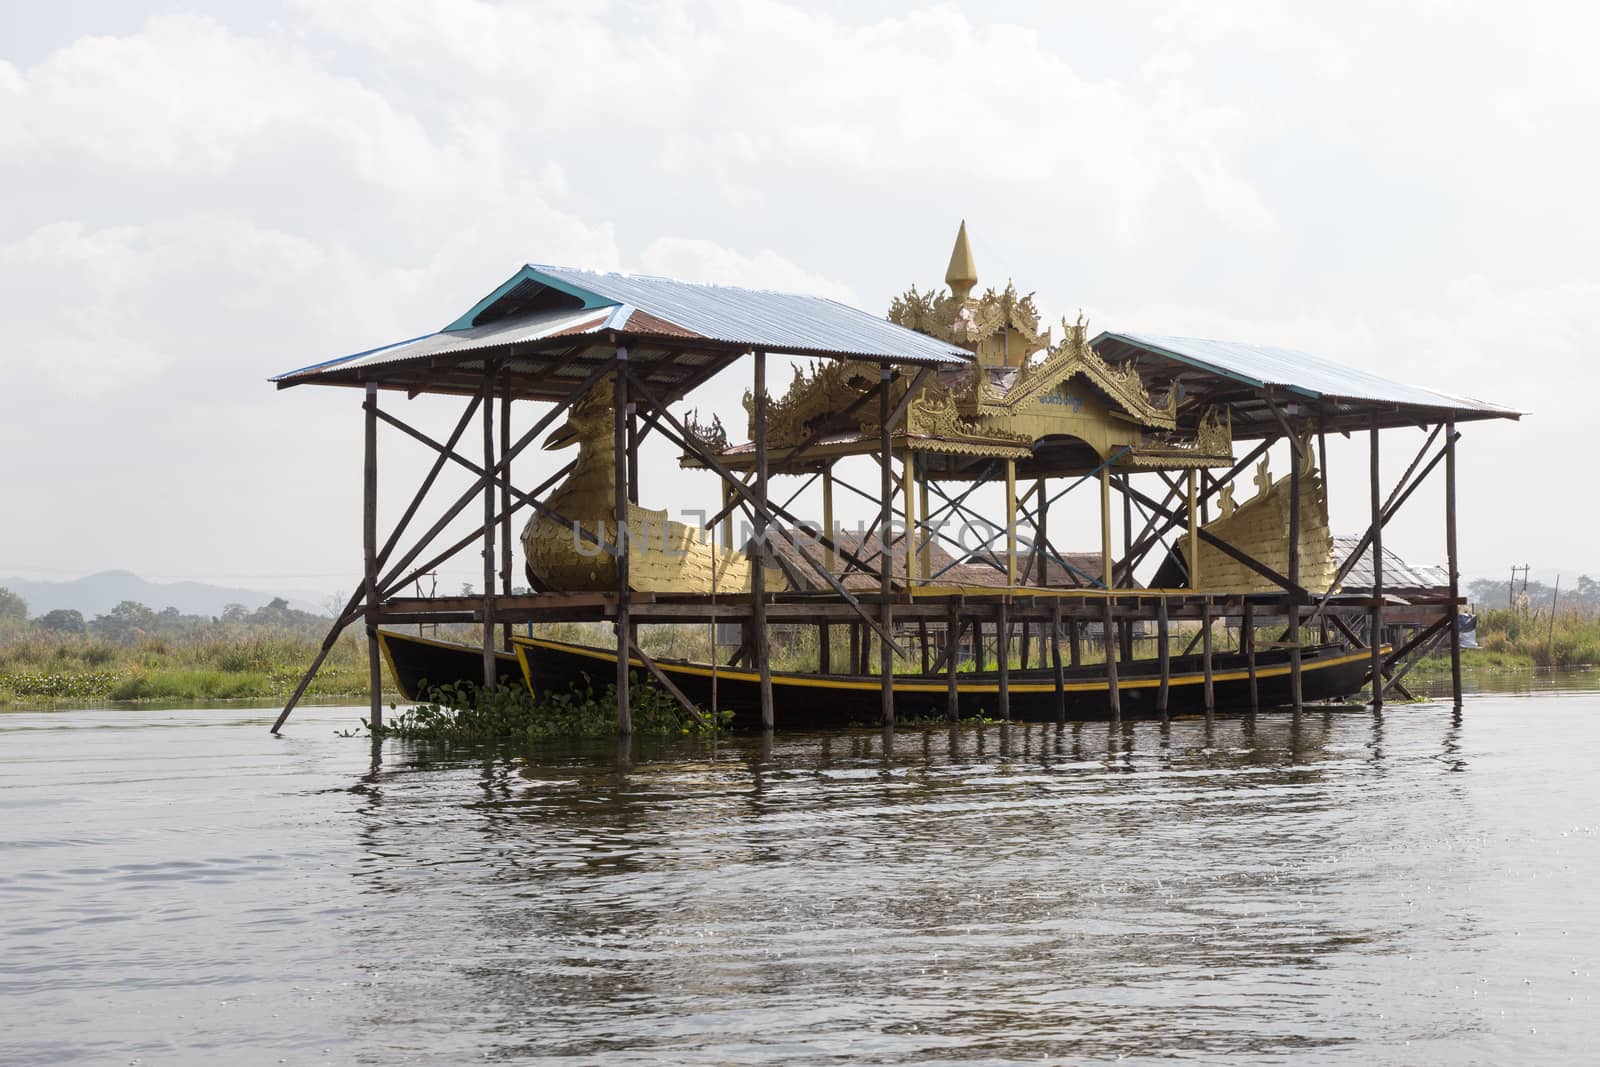 Inle Lake Myanmar 12/16/2015 with ceremonial boat under cover by kgboxford